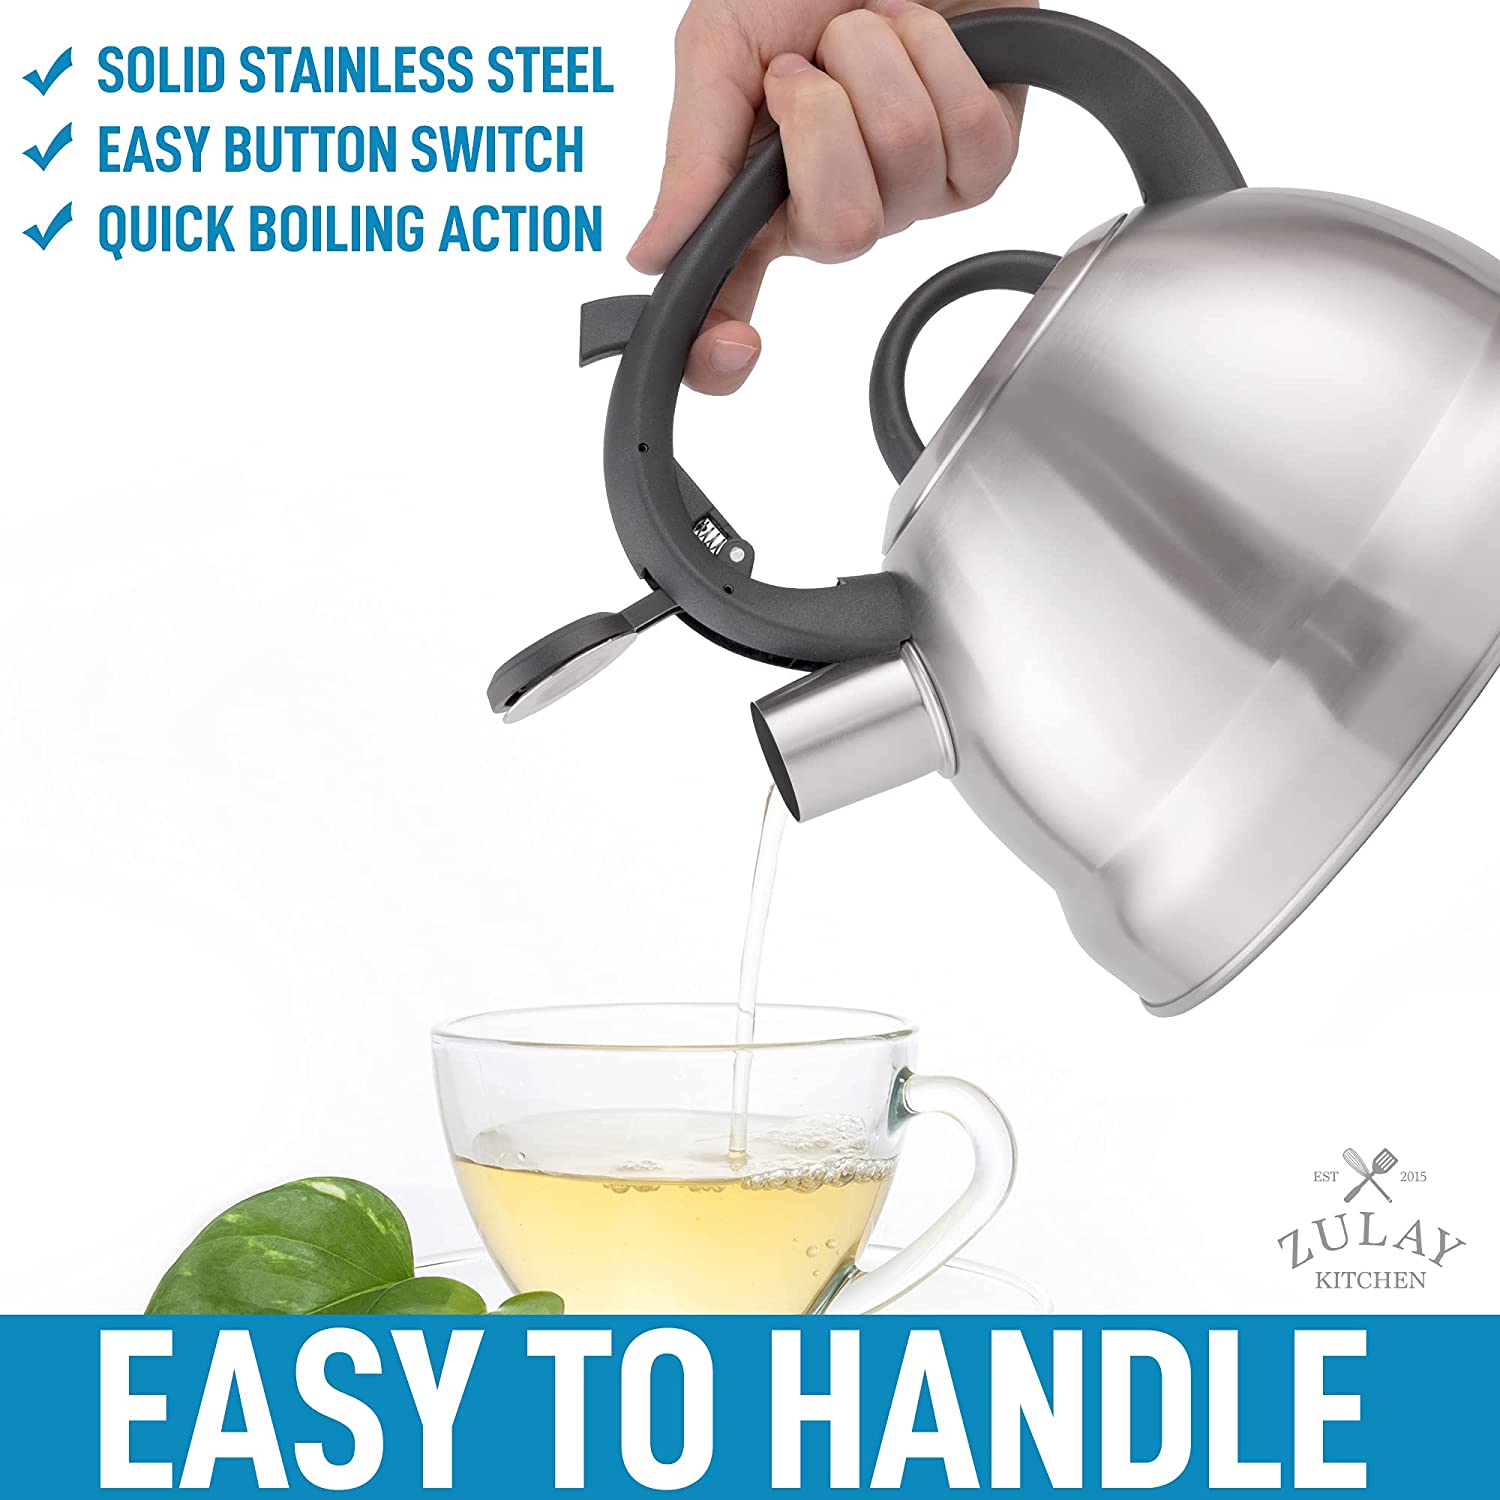 2 Liter Stainless Steel Whistling Tea Kettle Stove Top Water